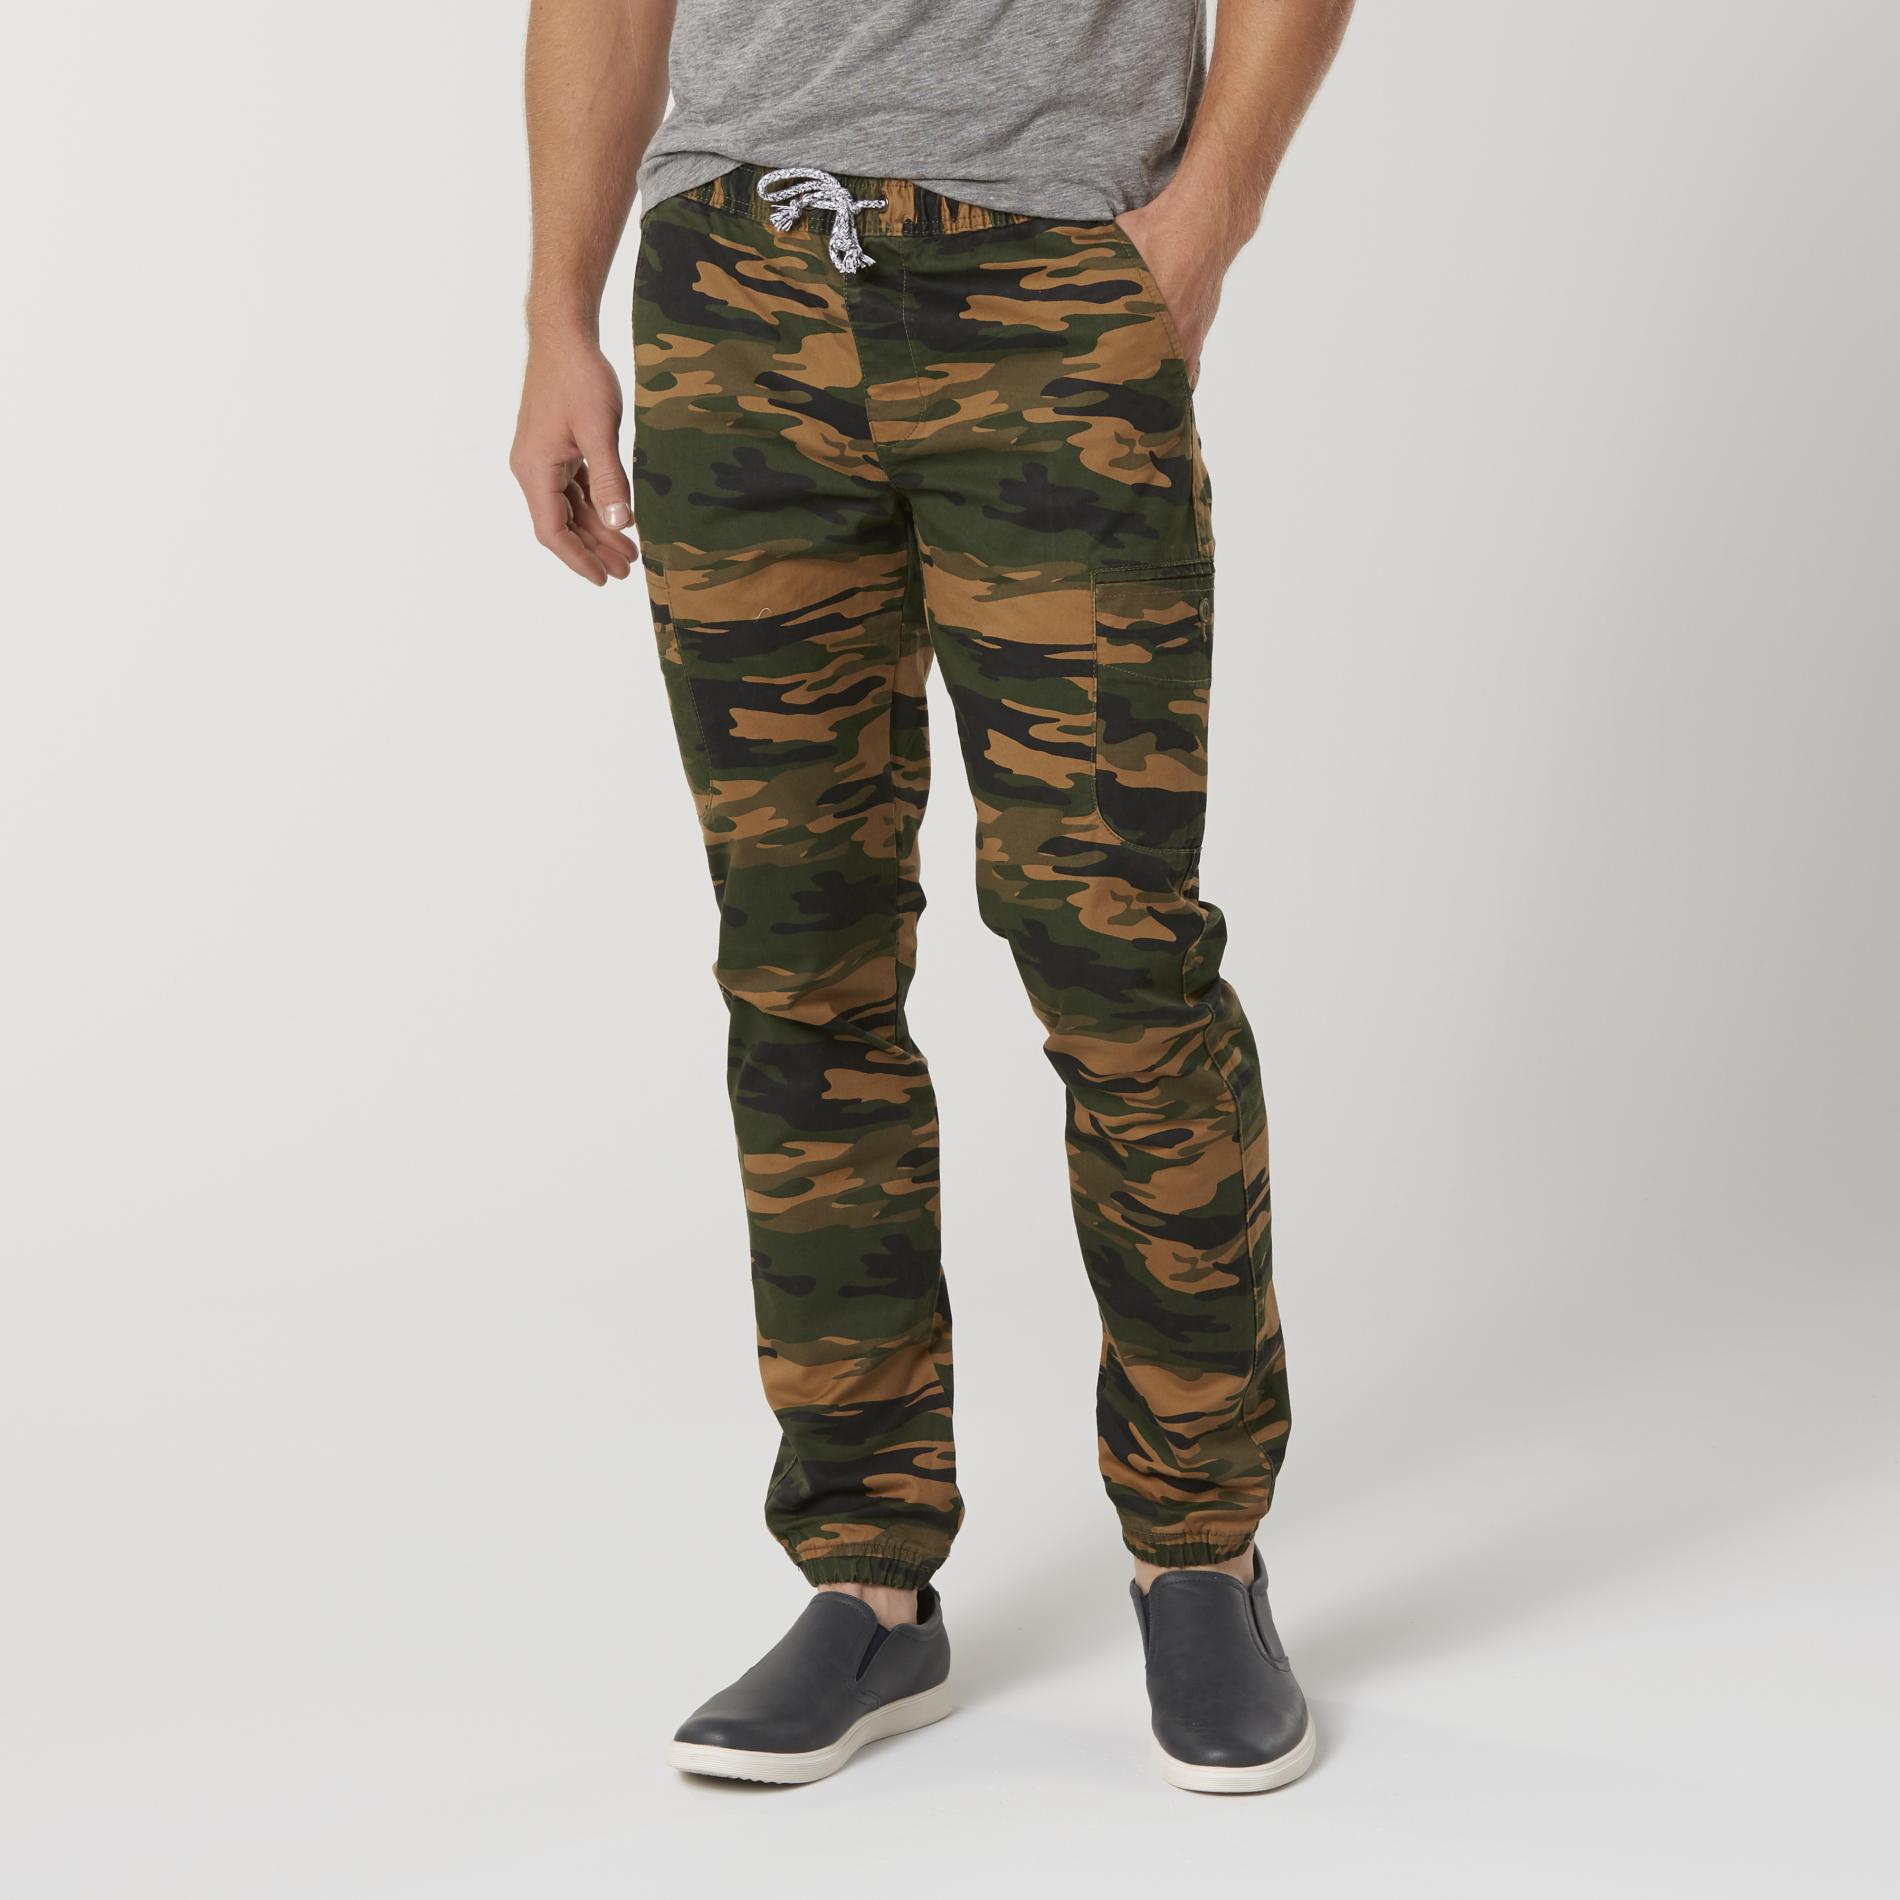 Amplify Young Men's Cargo Pants - Camouflage